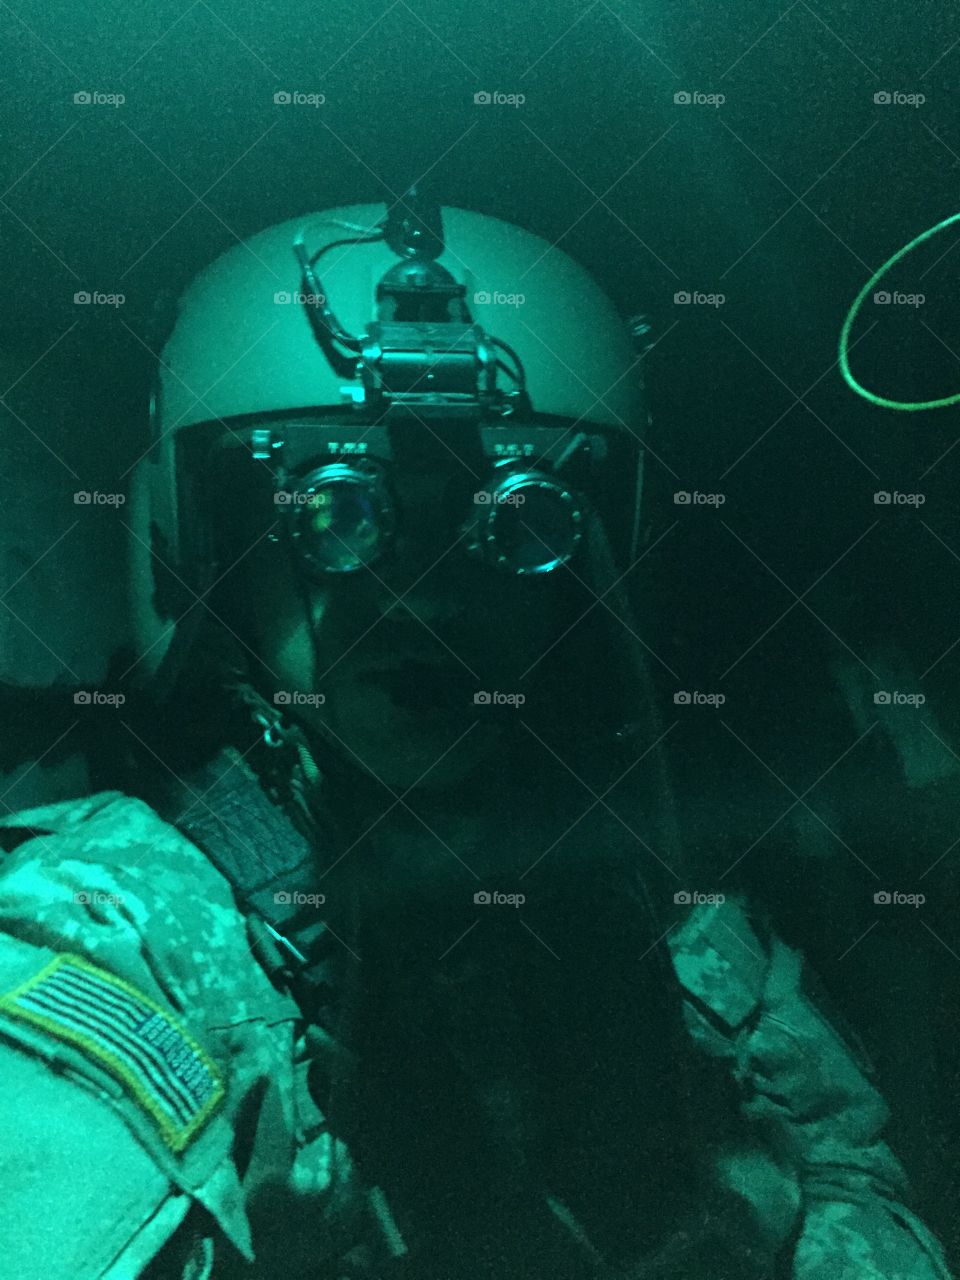 Night vision goggles during military flight training in the Blackhawk 